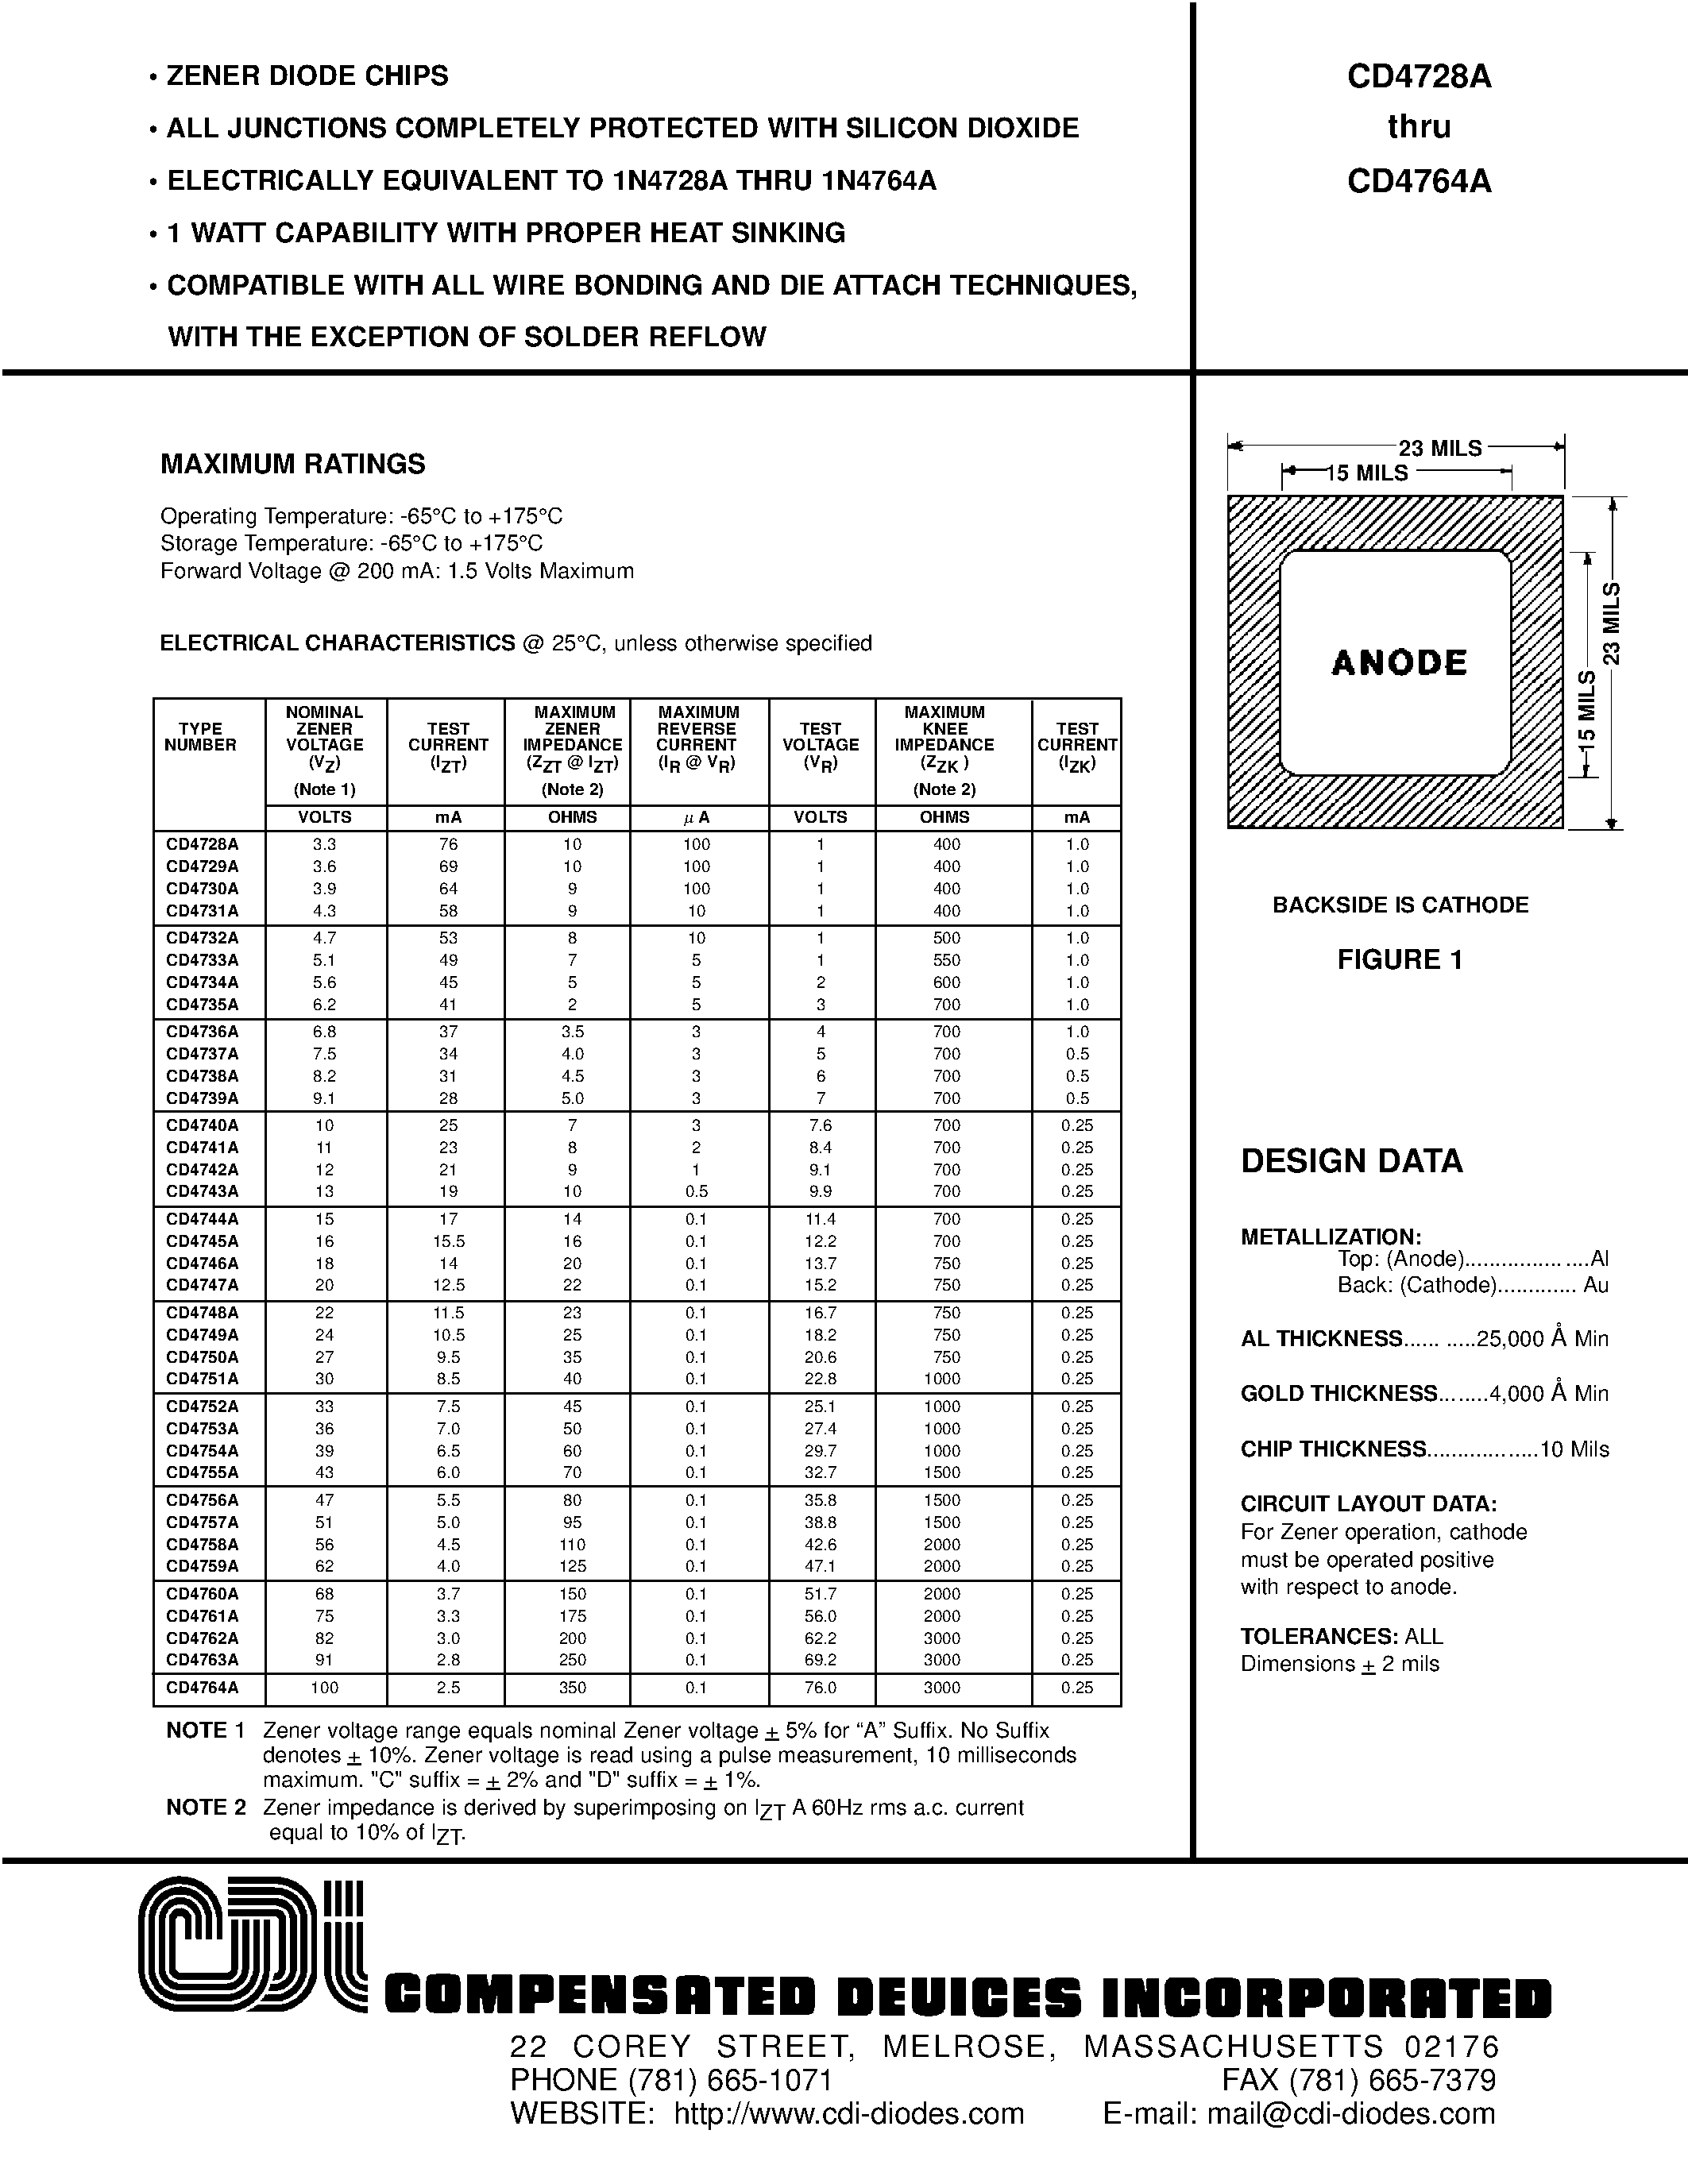 Datasheet CD4757A - ZENER DIODE CHIPS page 1